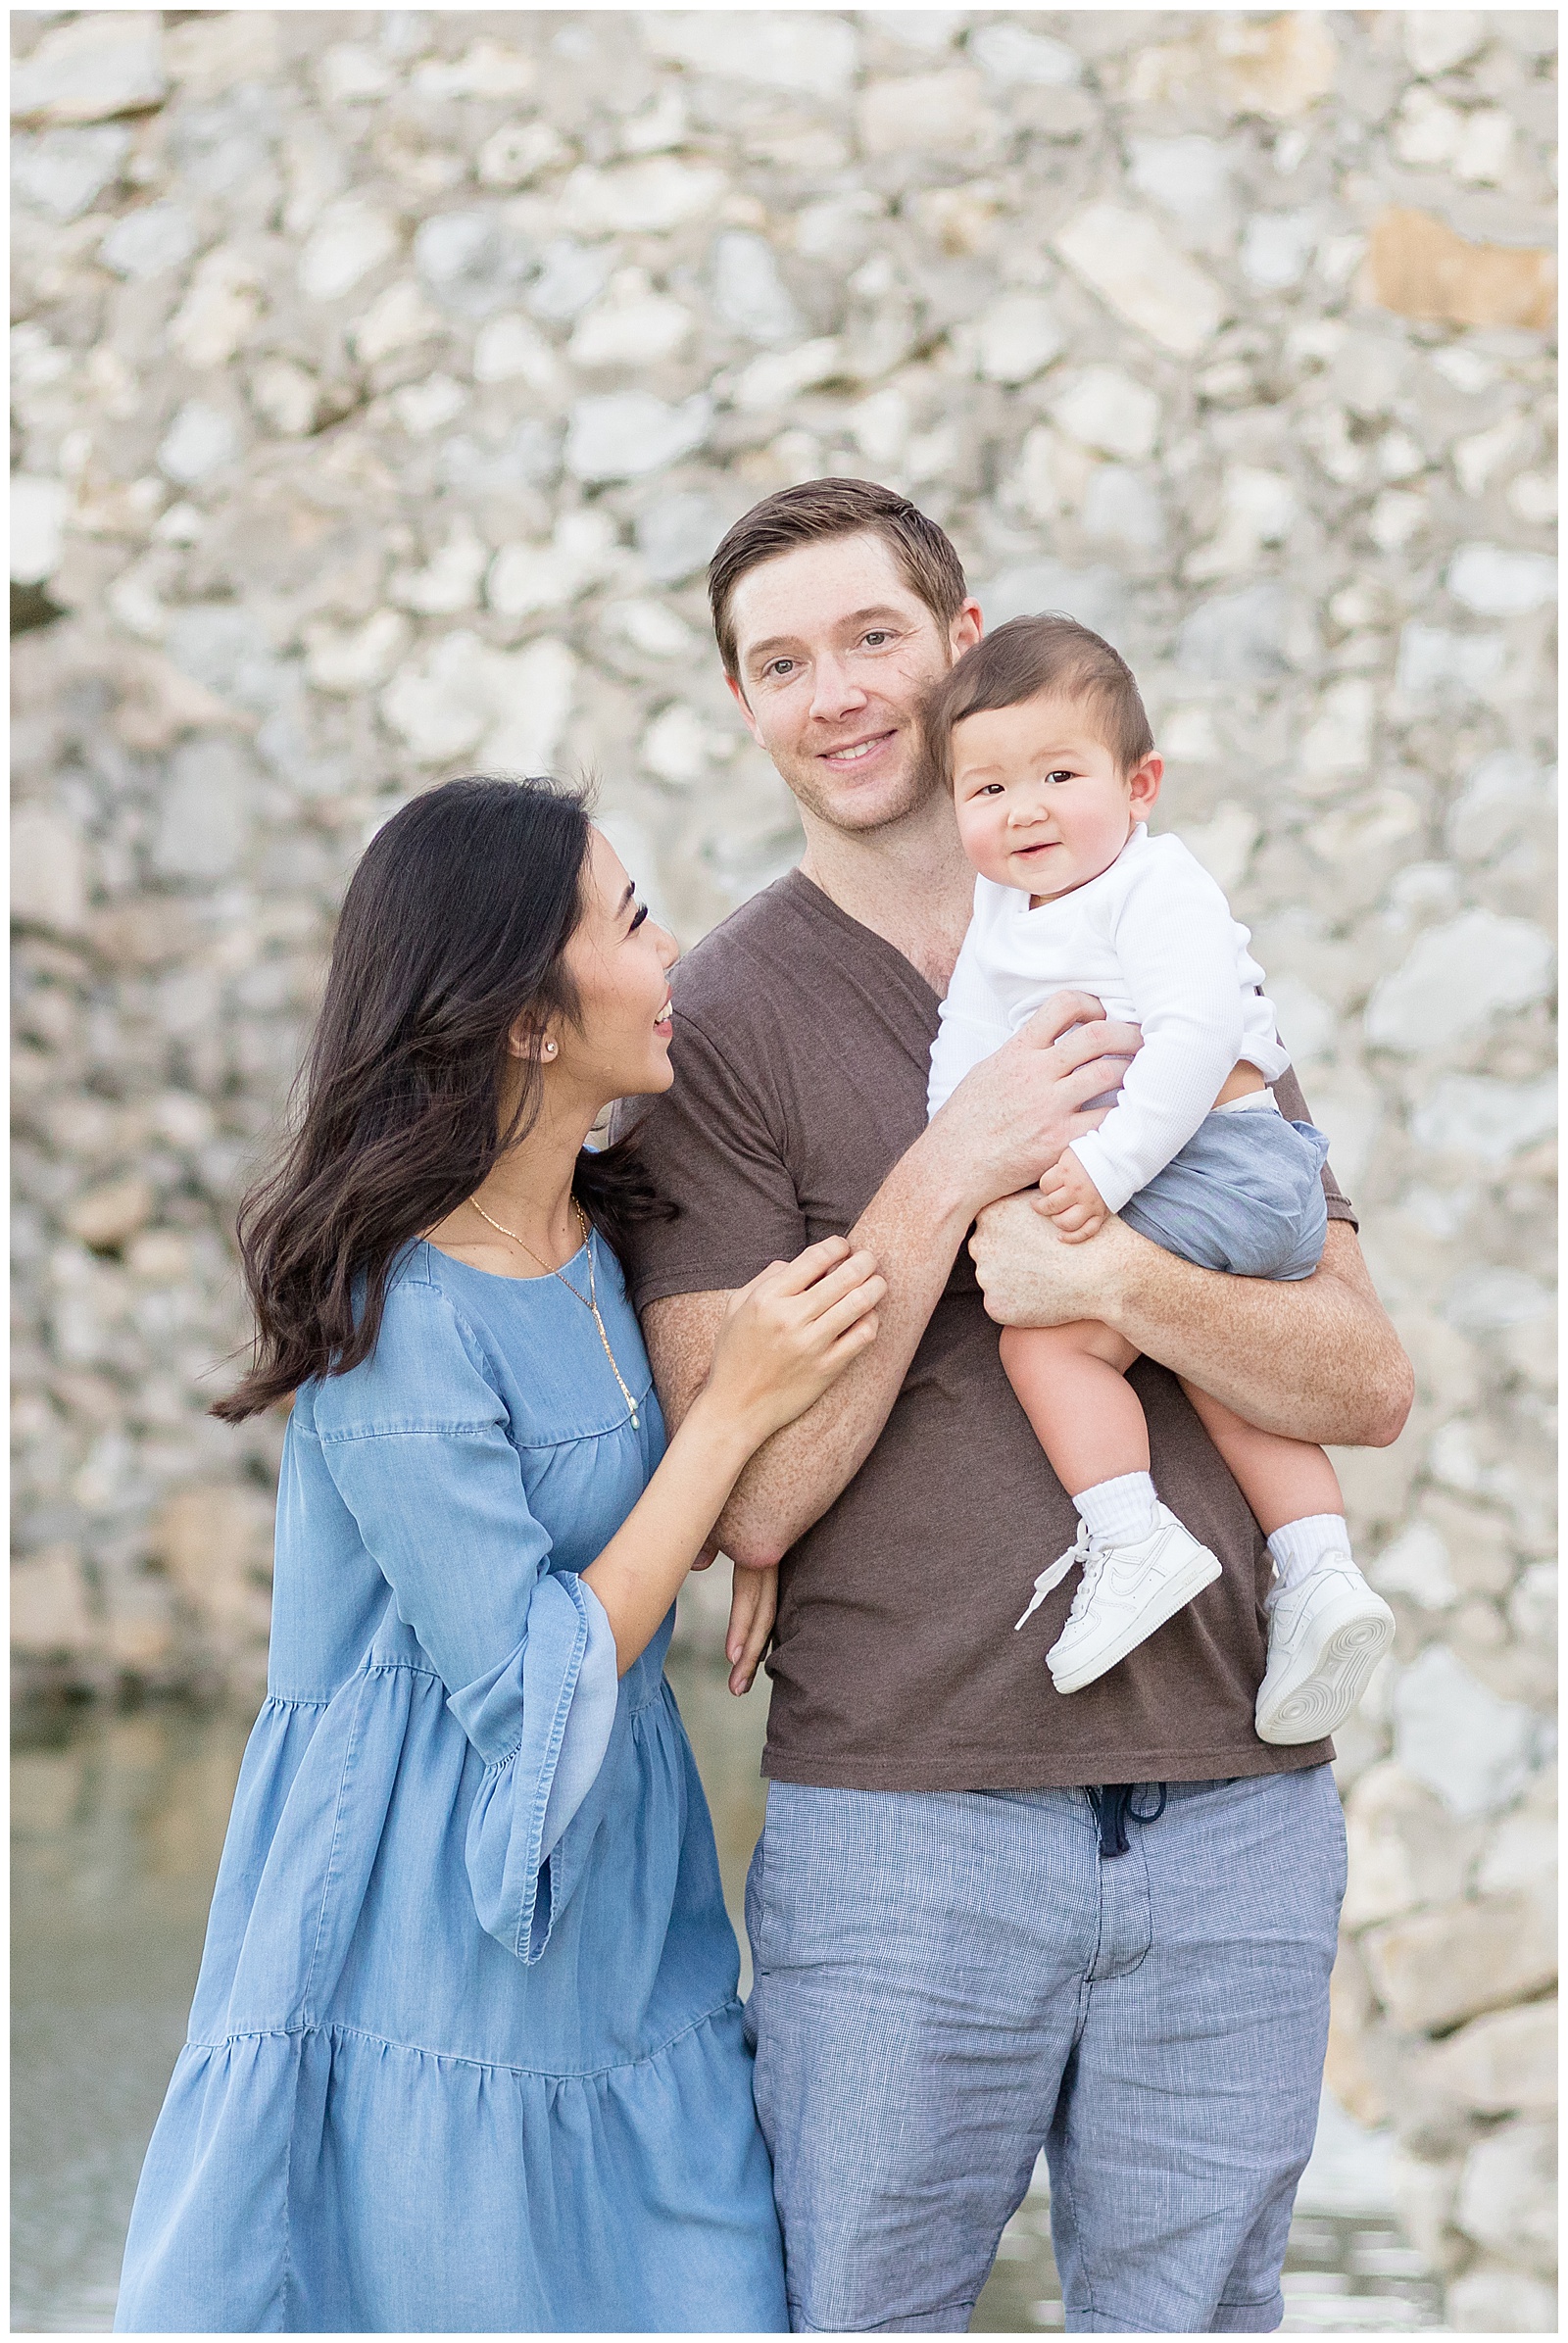 McKinney, TX family photographer at Adriatica Village for a fall family photography sesson.